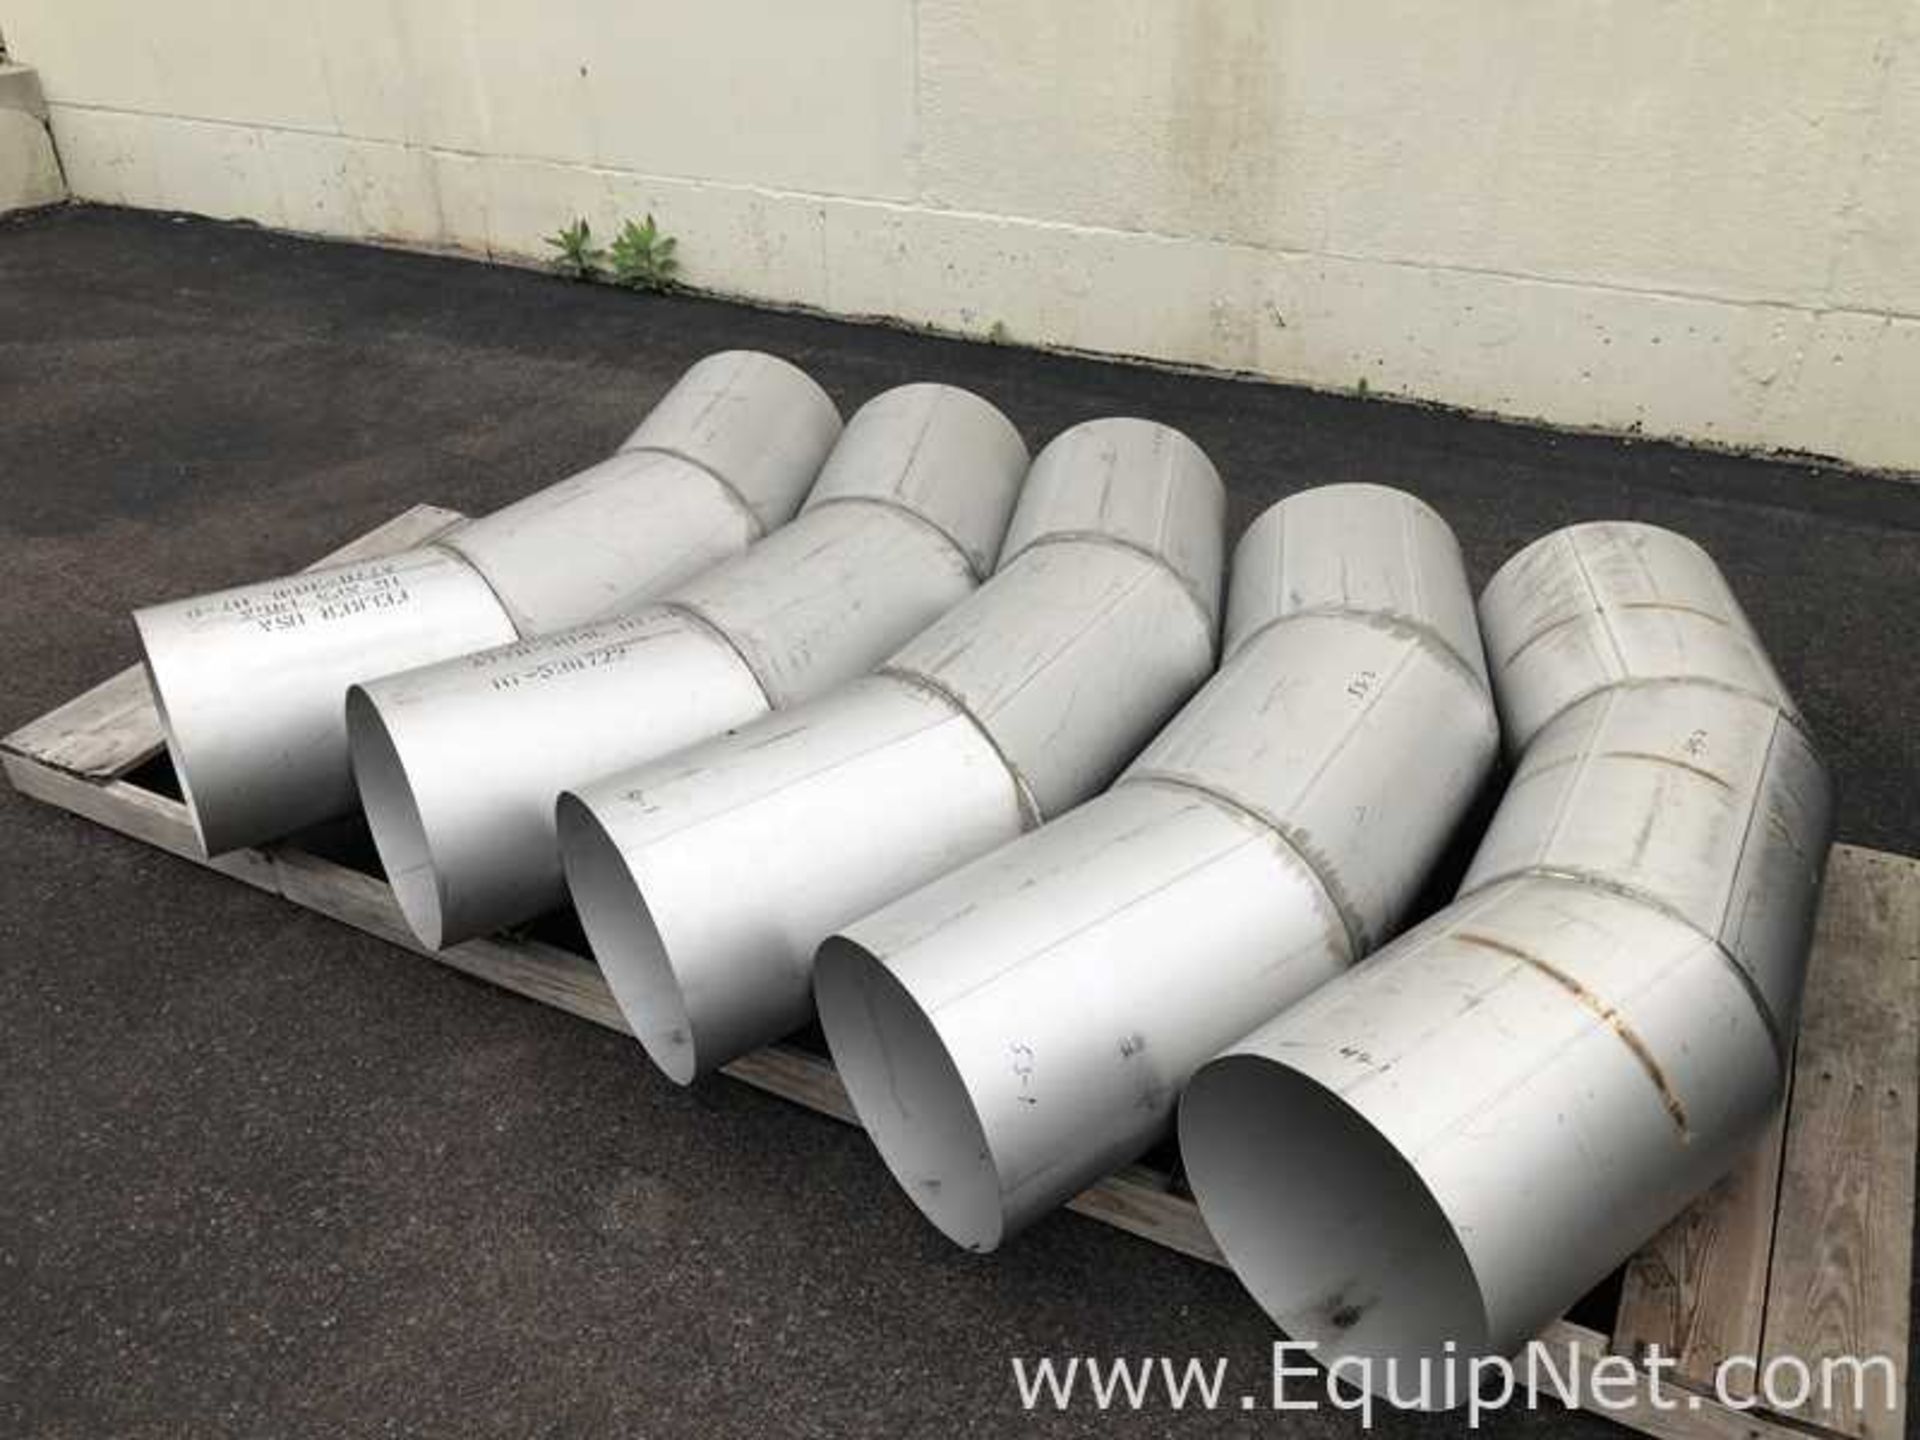 Lot Of Approx 15 Stainless Steel 304L Piping 16in diam X 150in Length Sections And Semi Elbows - Image 9 of 12